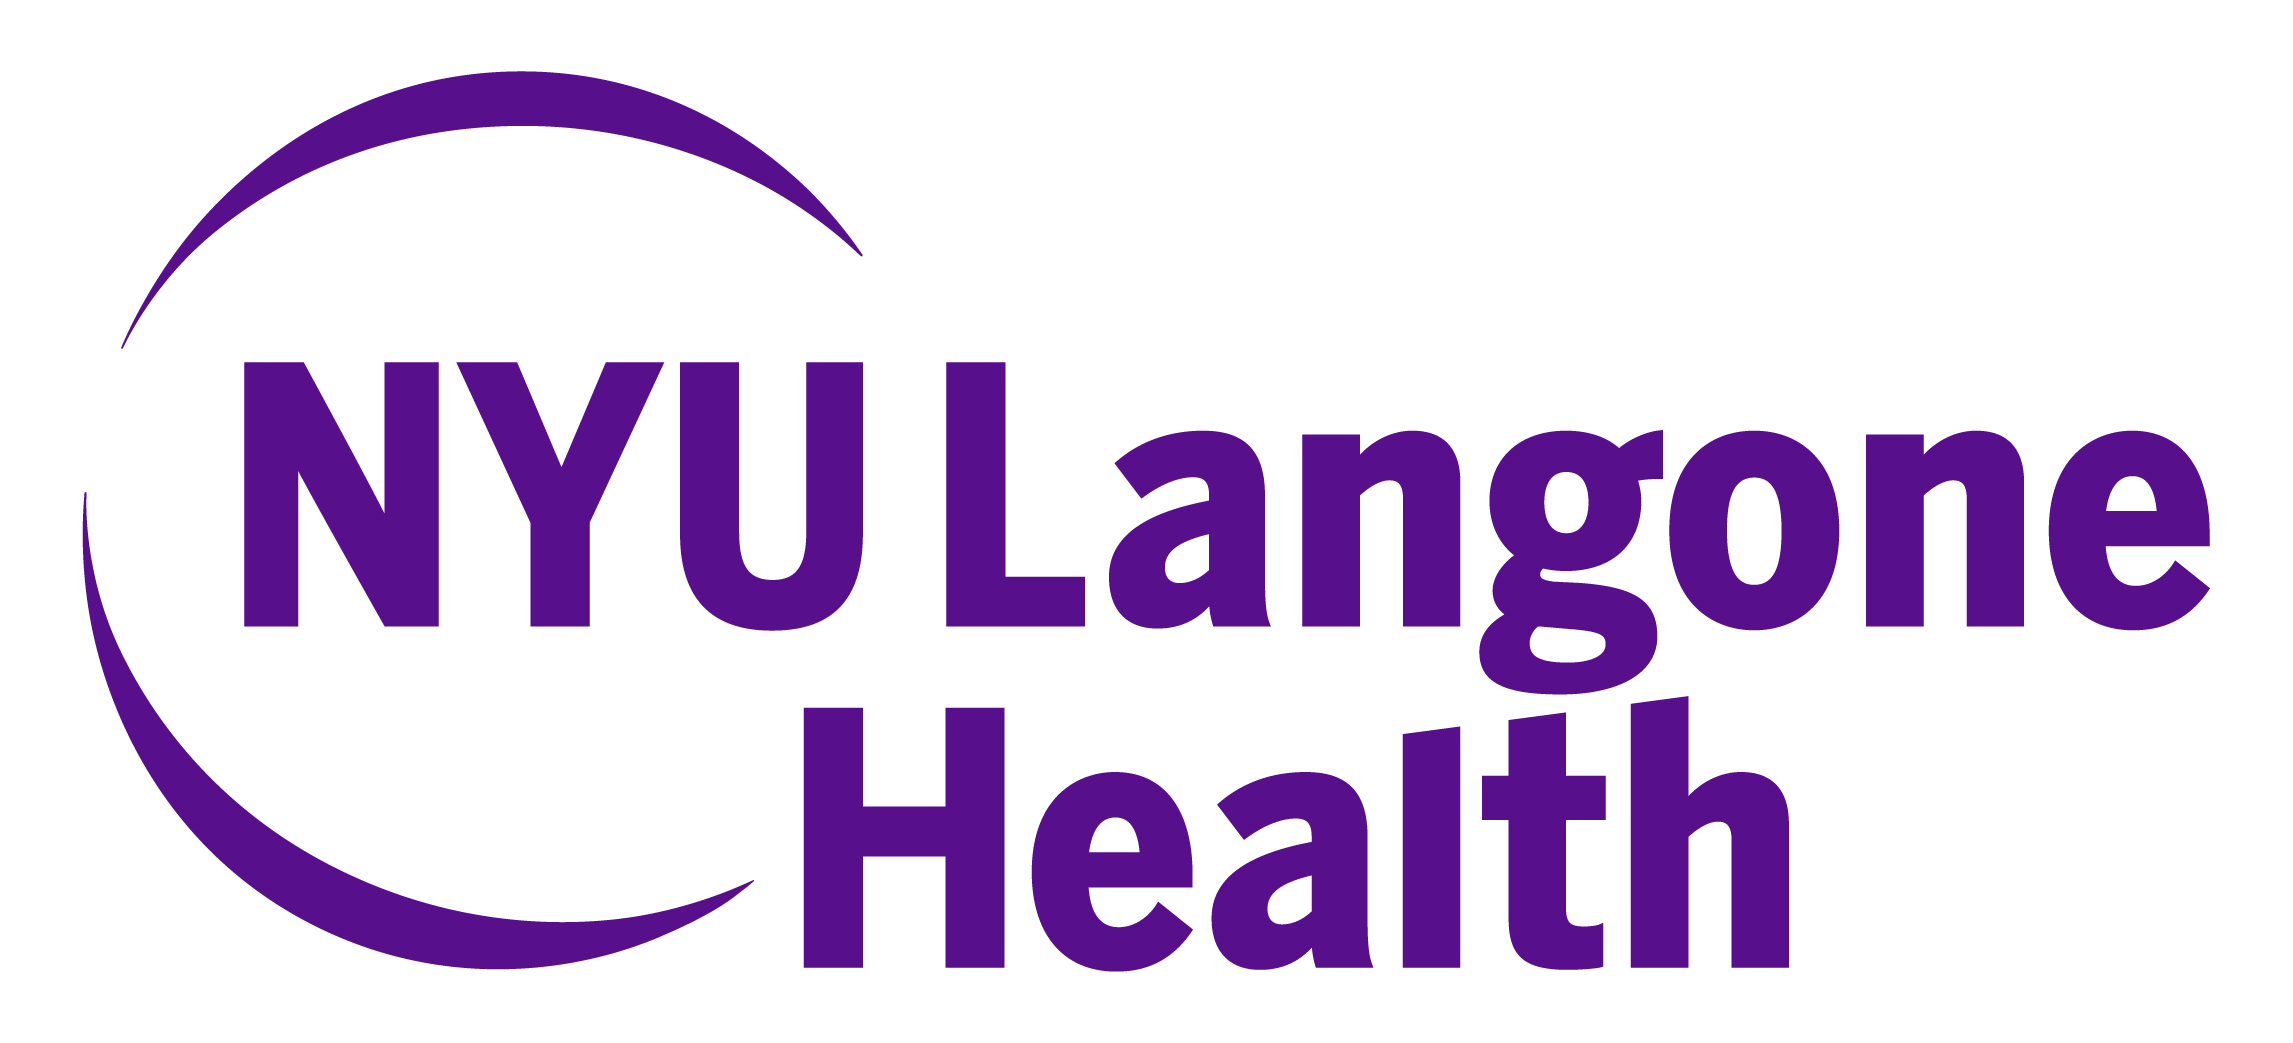 NYU Langone Health Ranks No. 1 in New York STATE and No. 3 in the Nation No 1. Neurology and Neurosurgery Program in the Country 